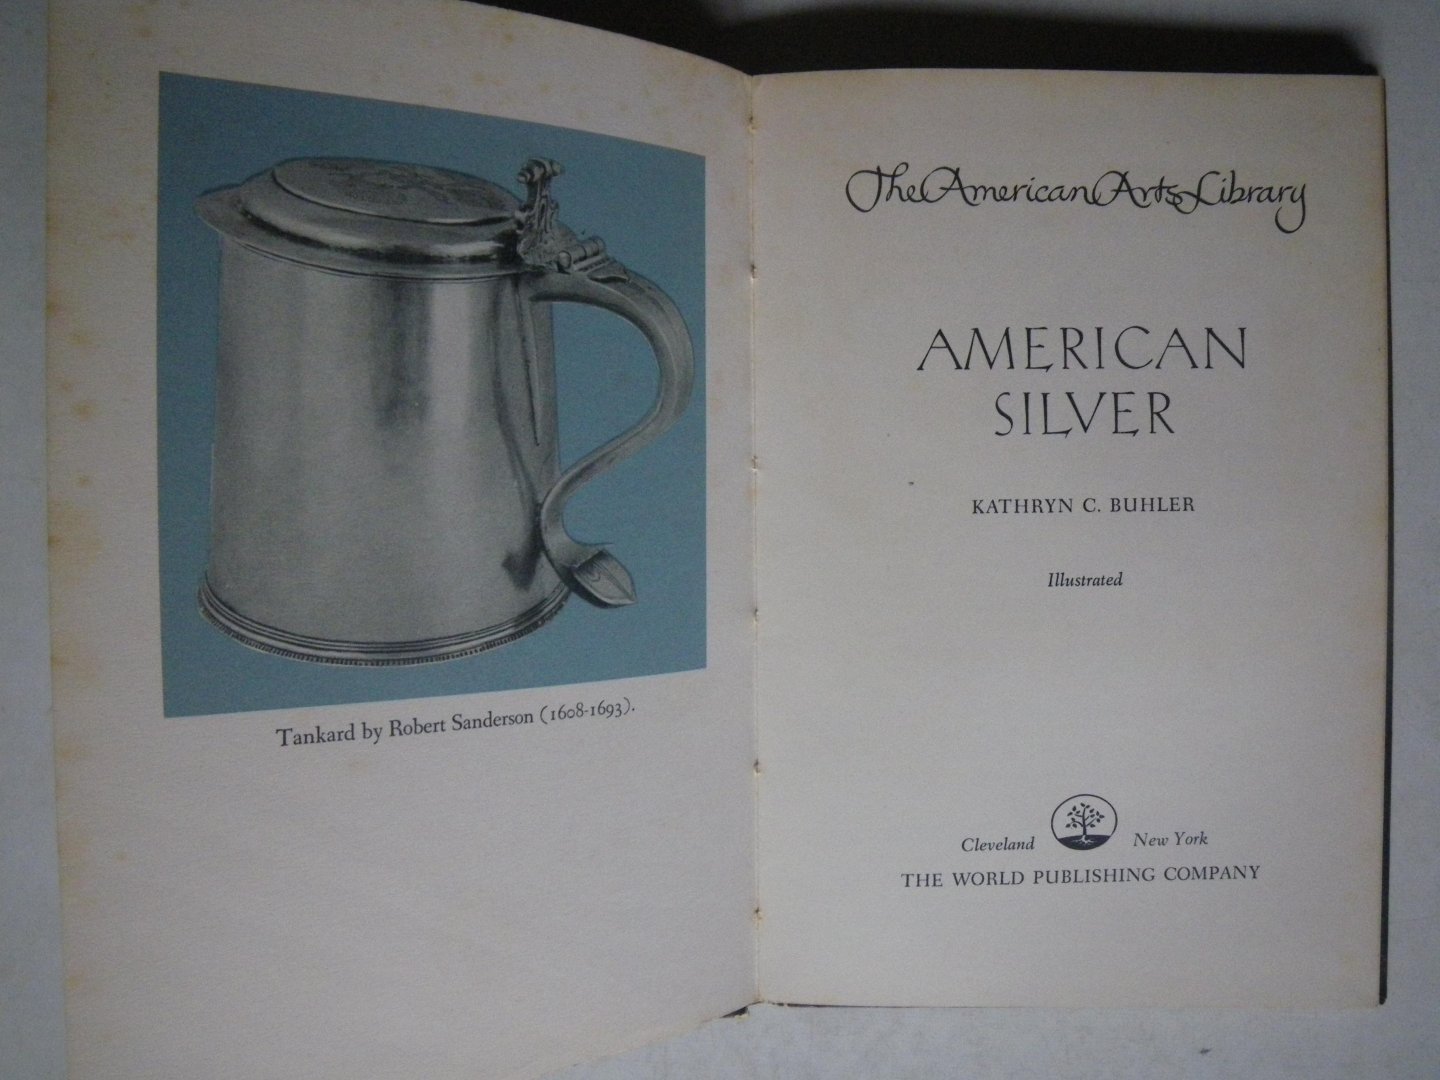 Buhler, K. C. - American Silver The American Arts Library